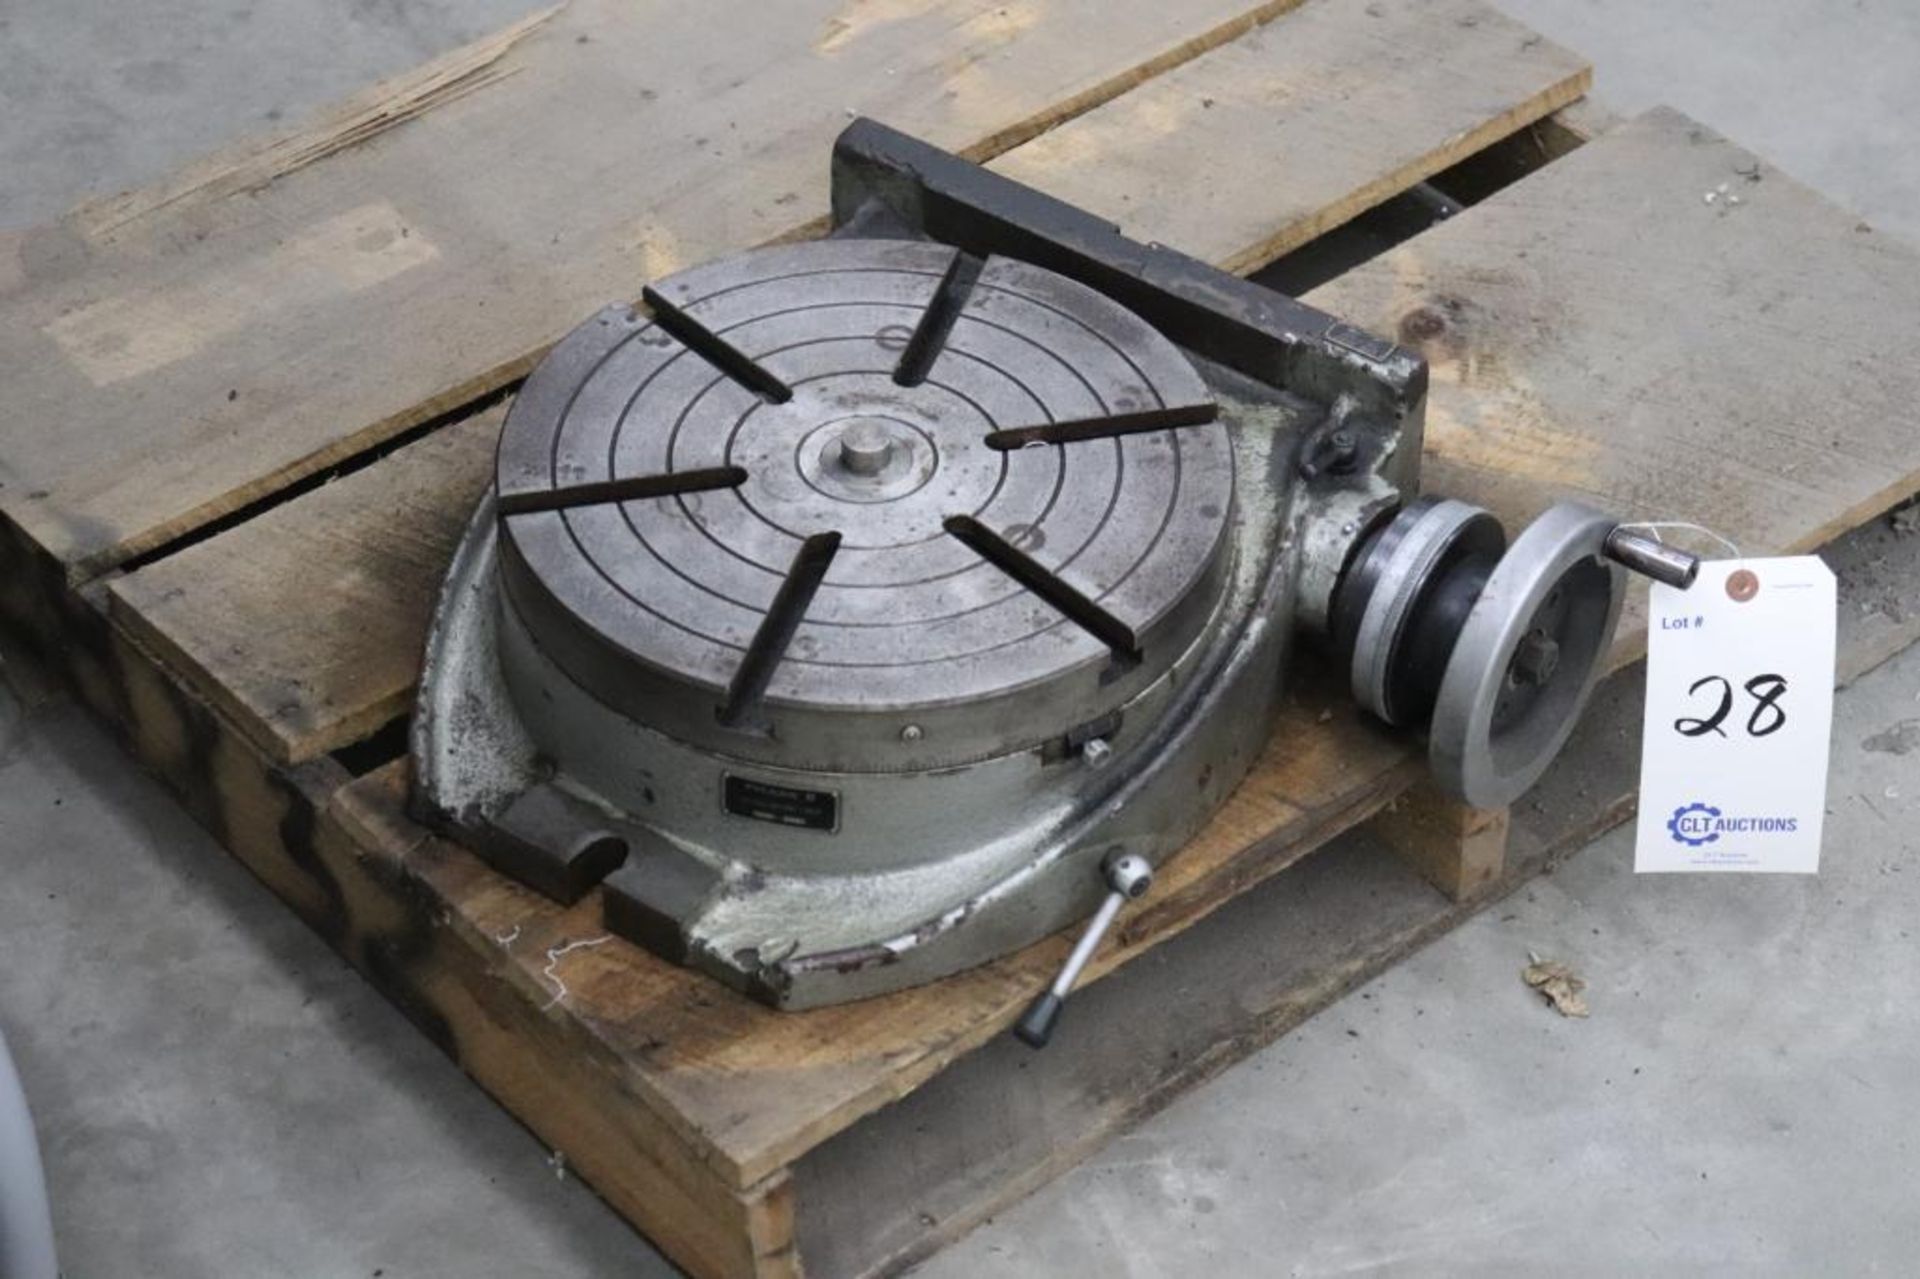 12" rotary table